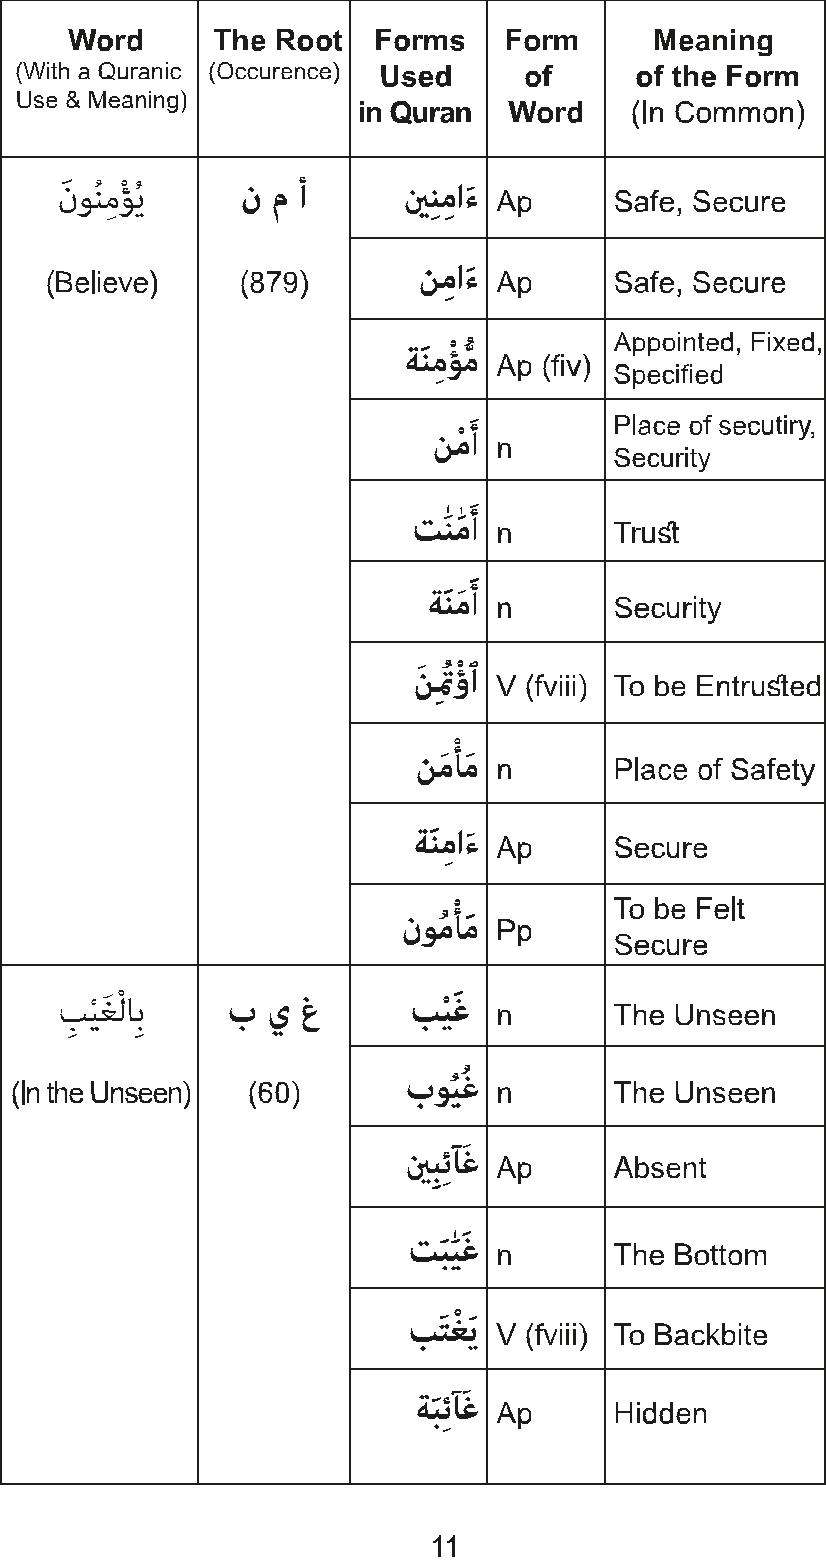 The Golden Words Dictionary of the Holy Quran - The Root Words and Their Forms - photo 13